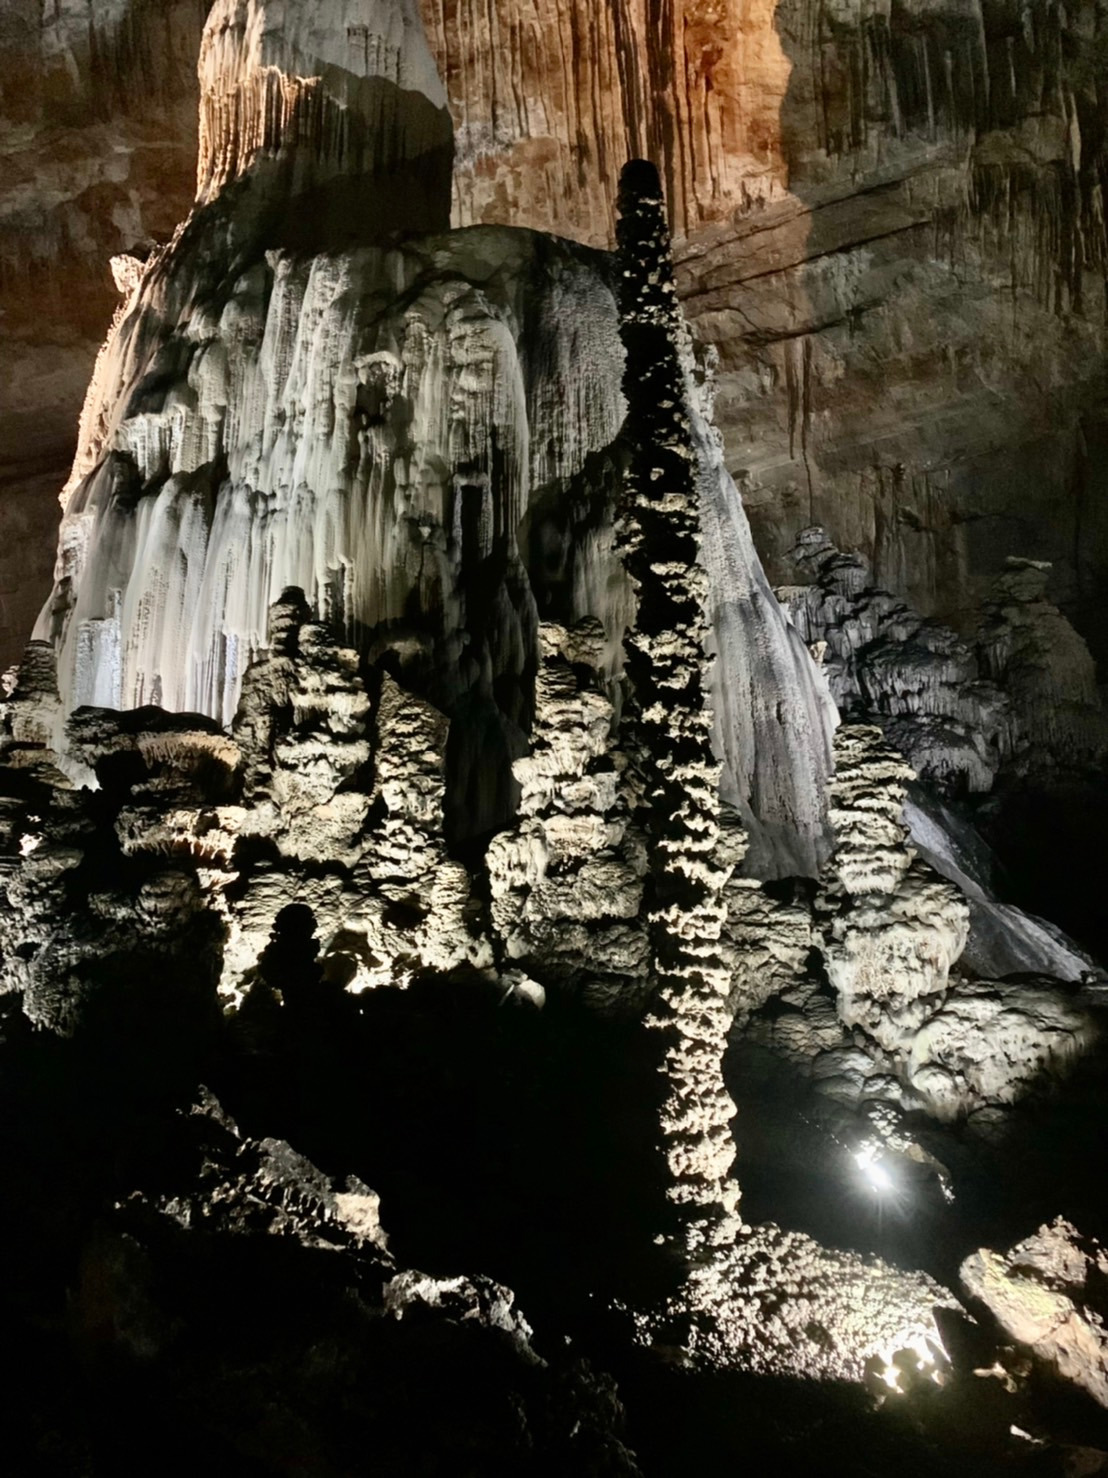  best known for the Grutas de Cacahuamilpa Caverns, which are one of the largest cave systems in the world. It is also home to the Grutas of Carlos Pacheco, a smaller system, as well as two subterranean rivers which have carved out tunnels in the rock.